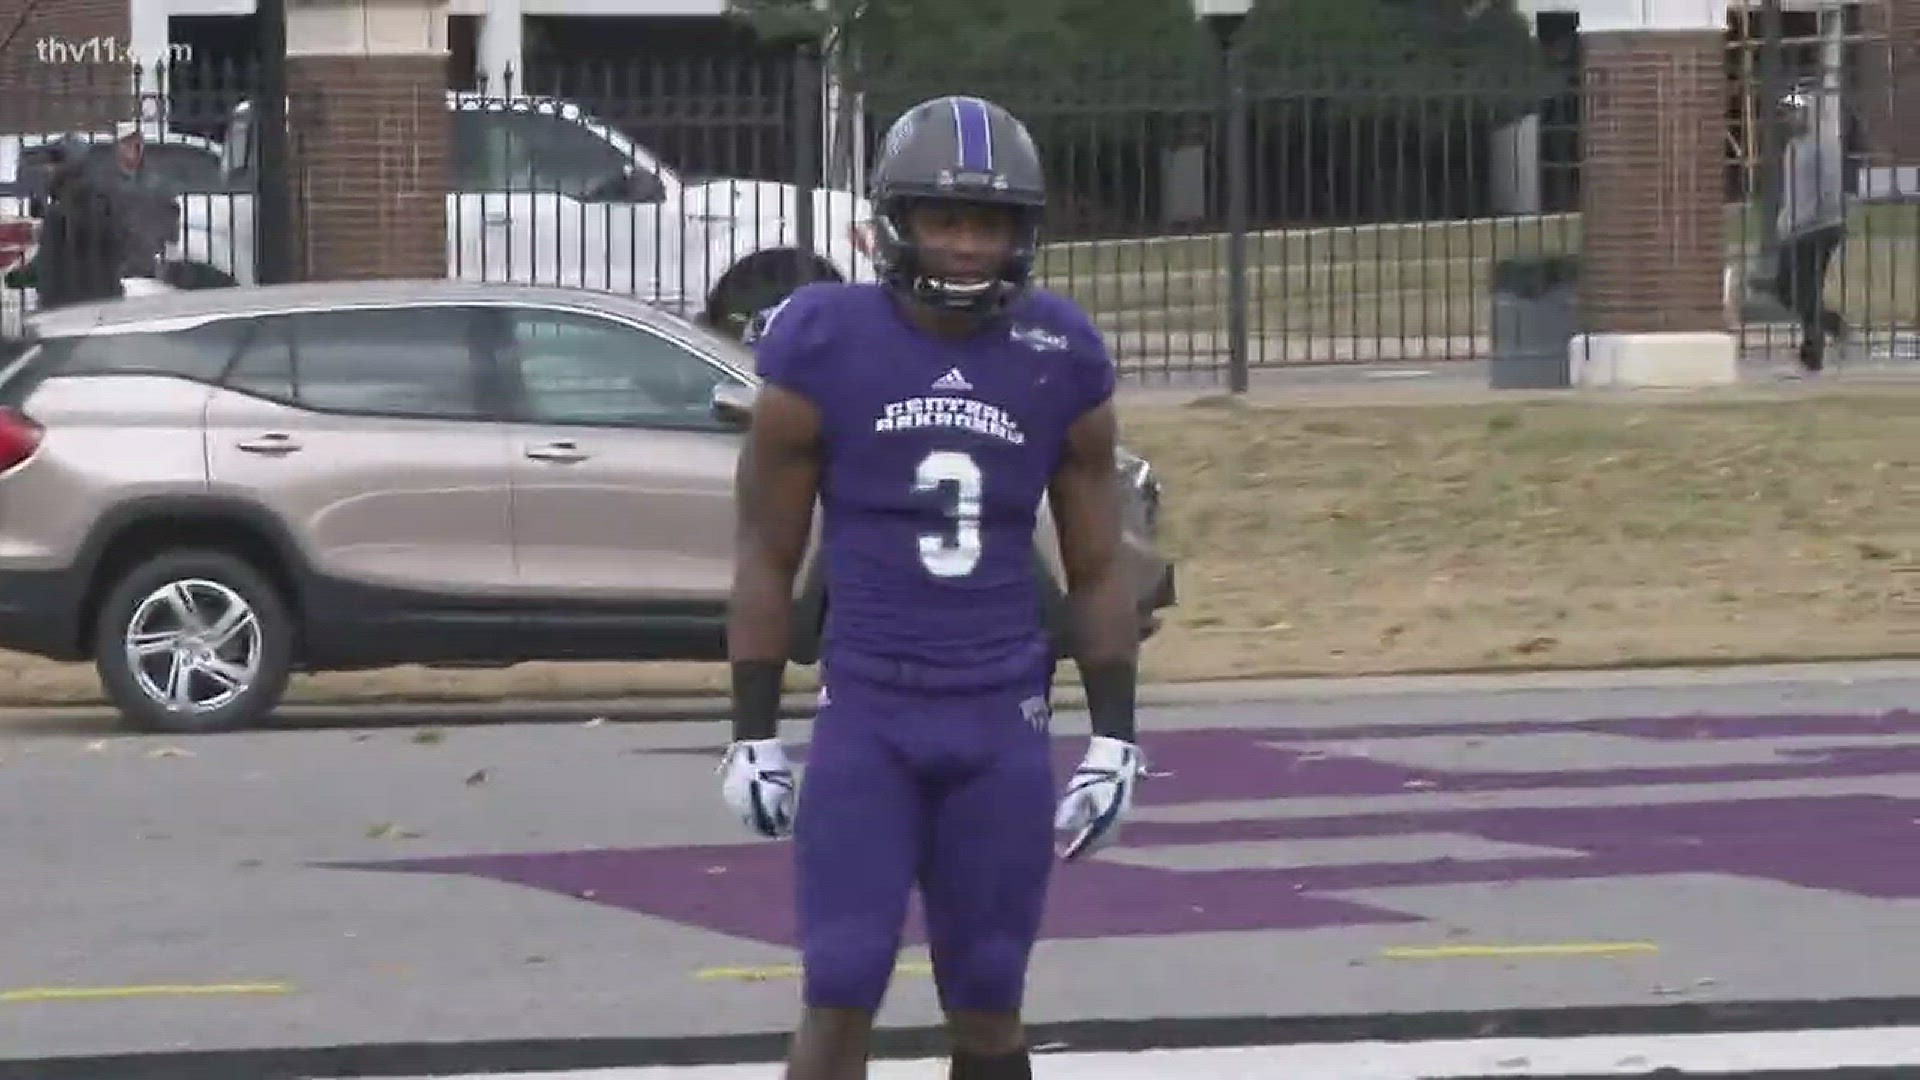 UCA blanks ACU 34-0, wins outright Southland championship